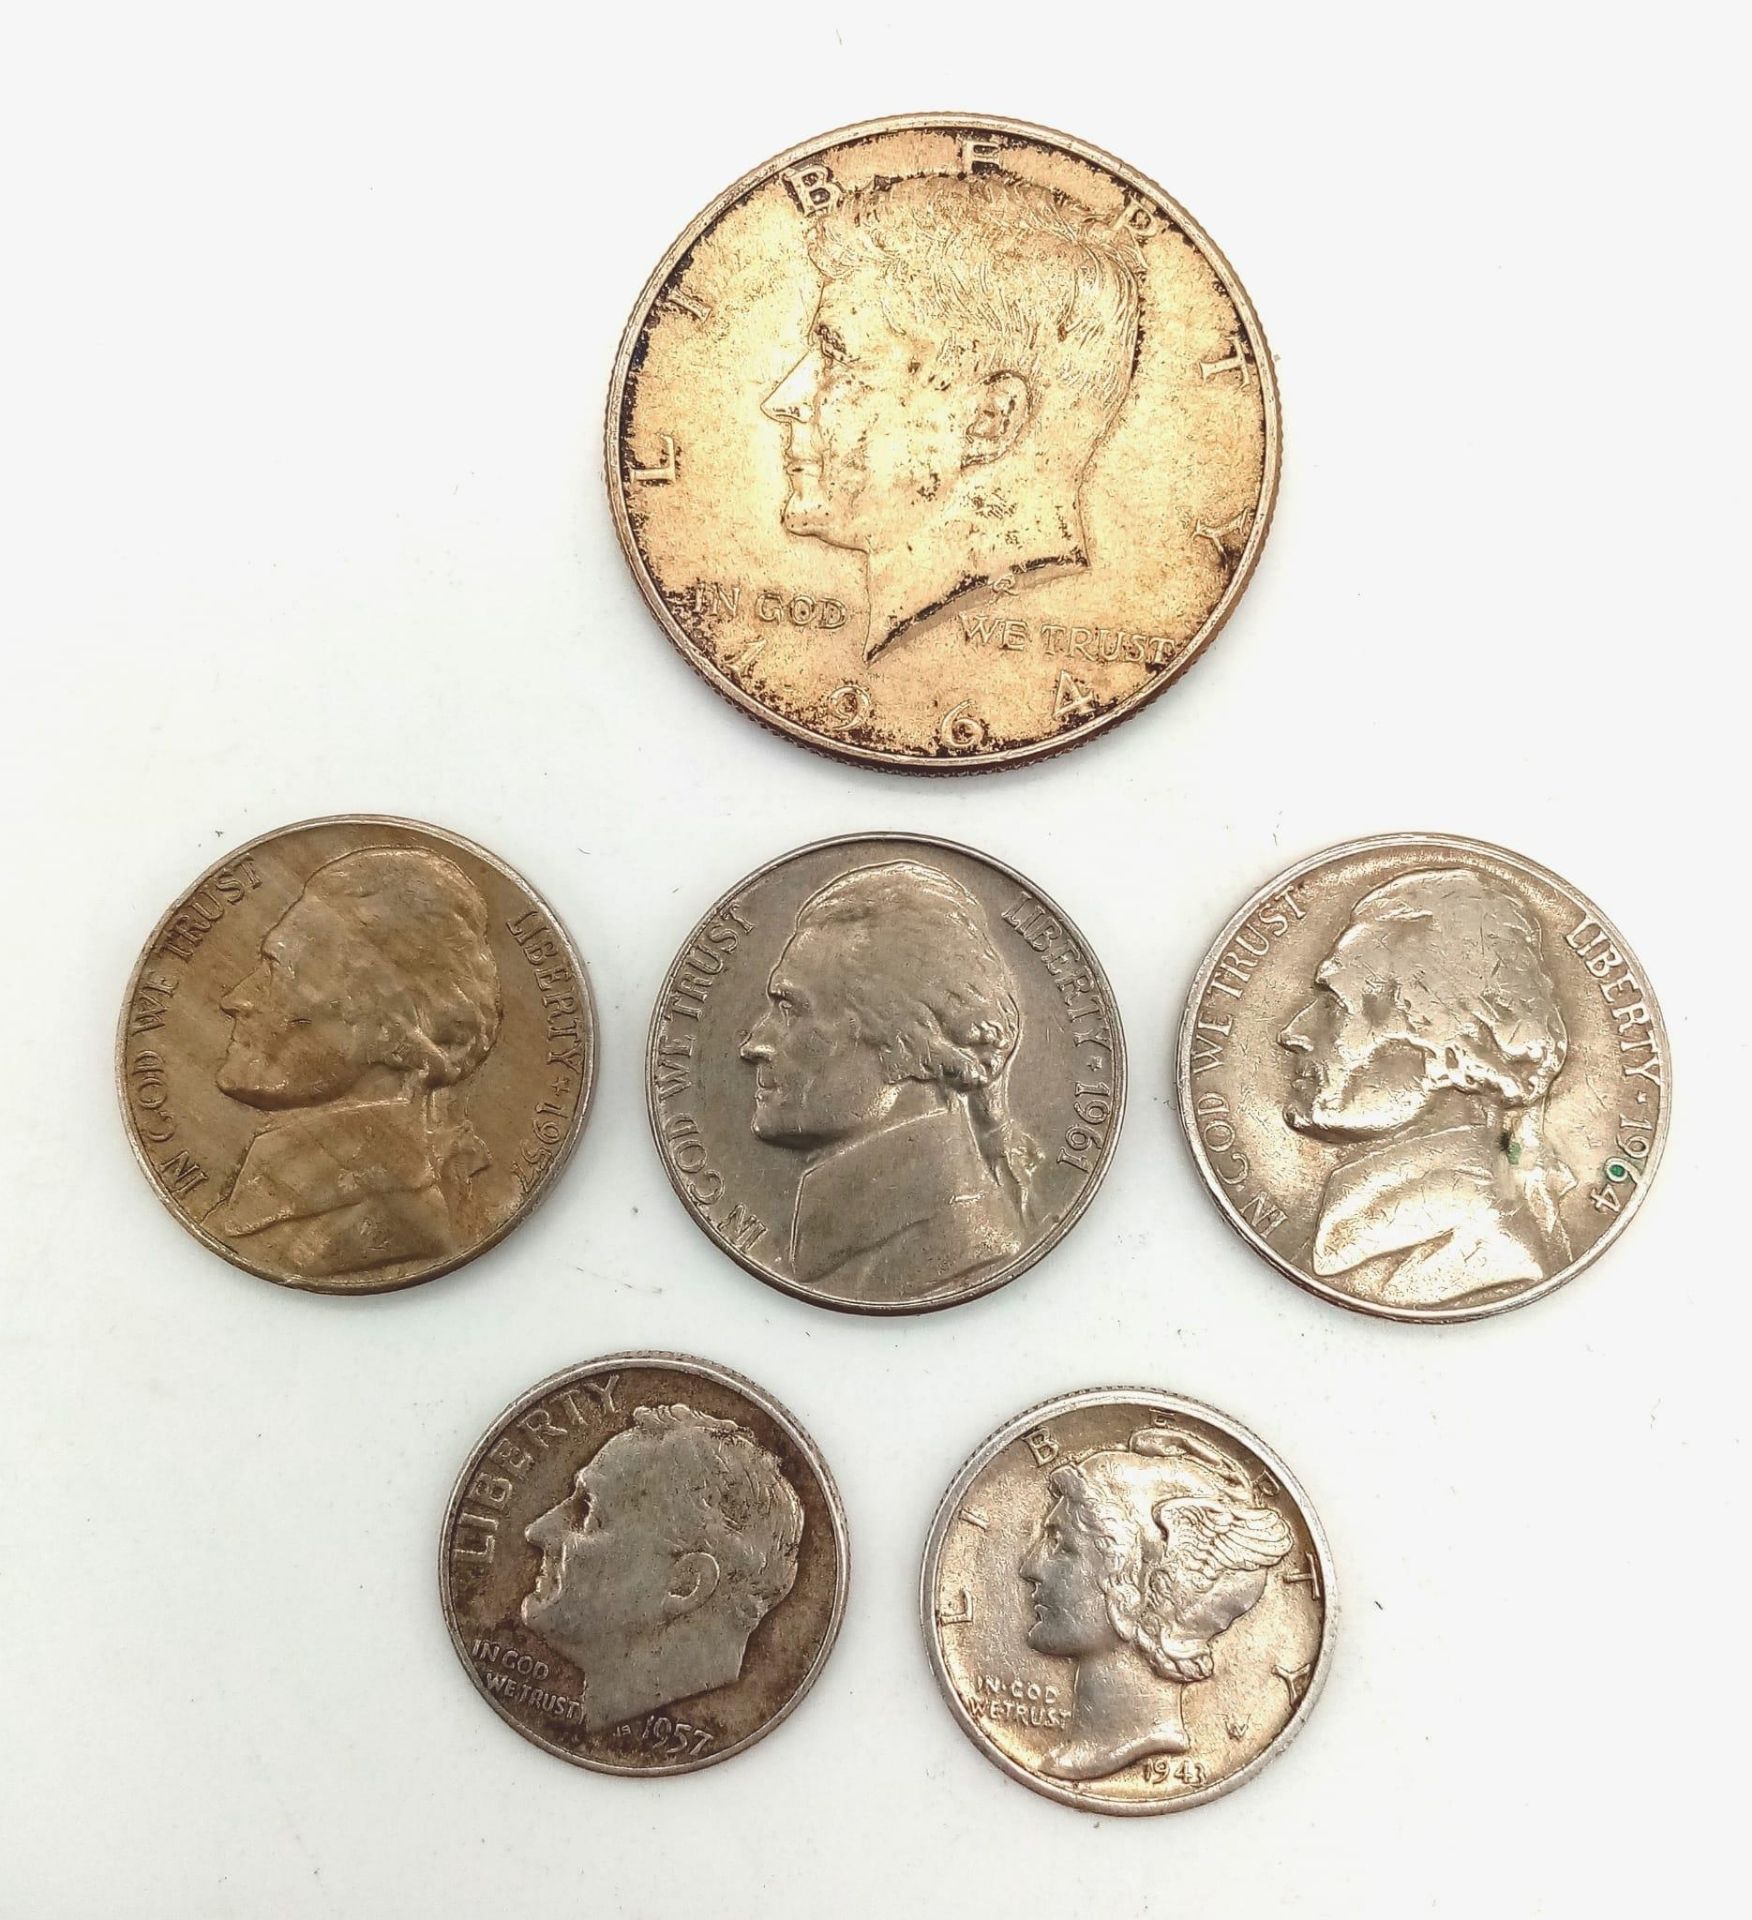 A Parcel of 6 Silver Pre-1965 US Coins Comprising: 1964 Kennedy Half Dollar (About Uncirculated),